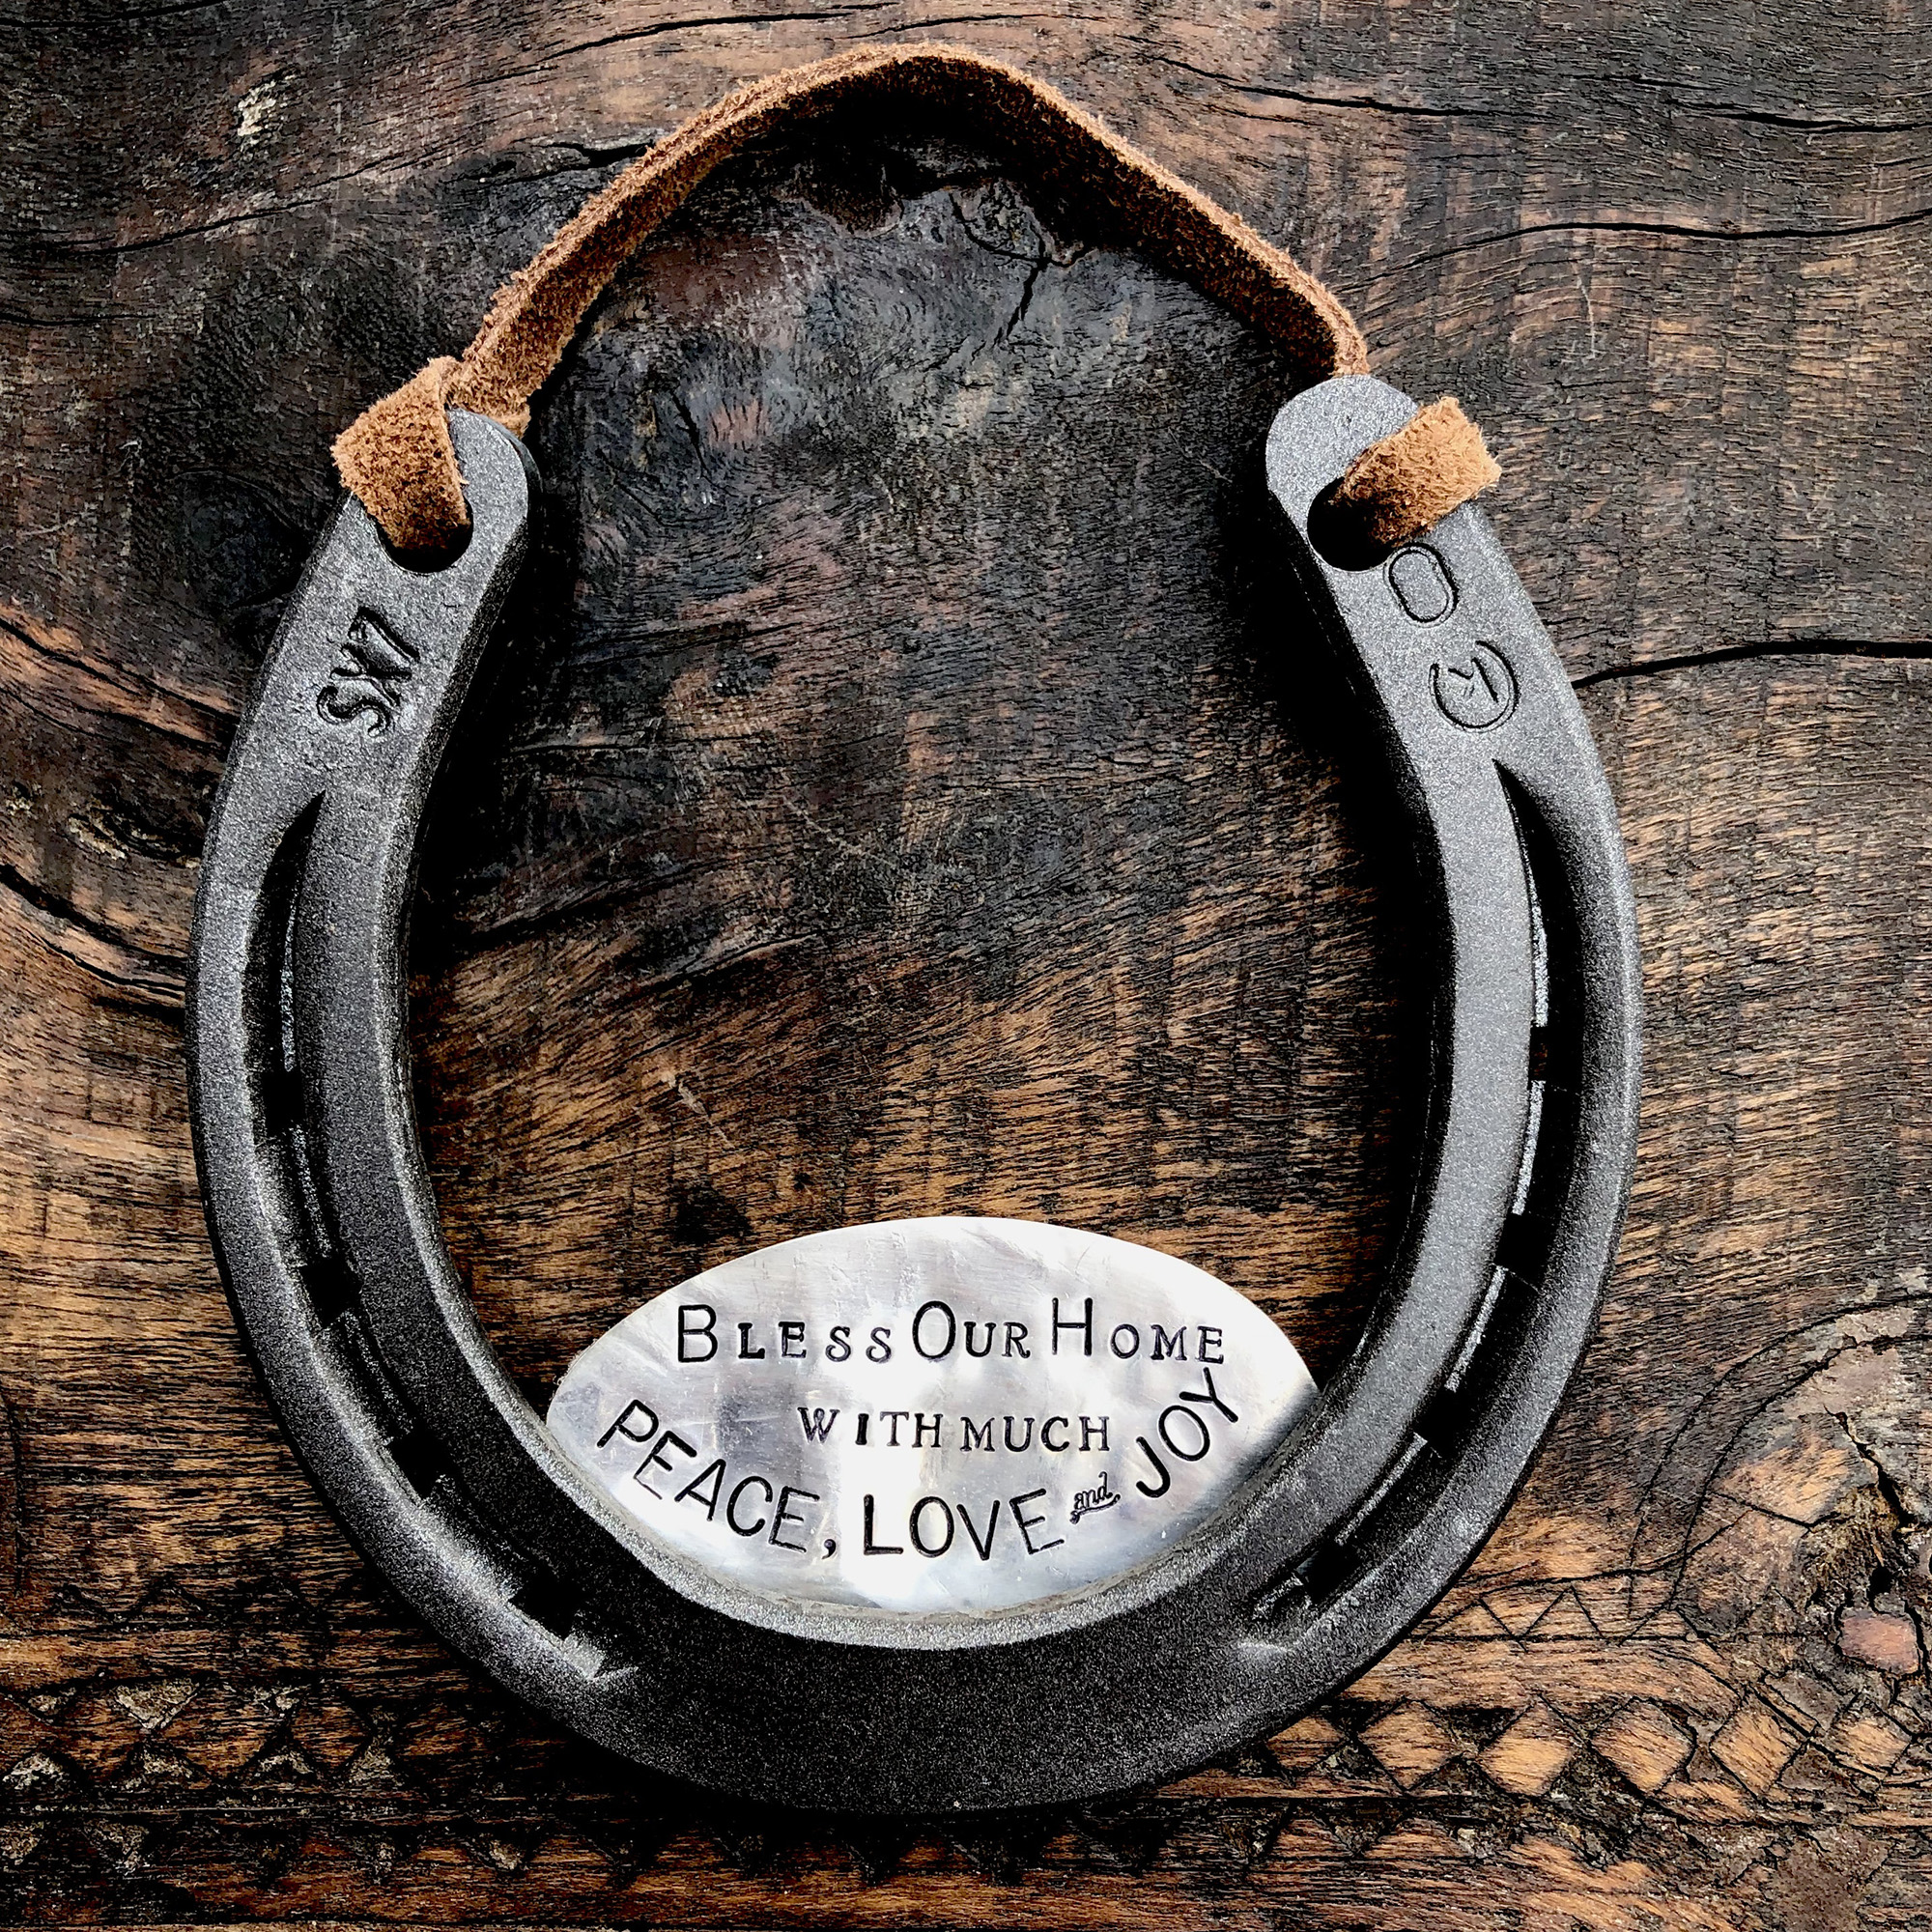 Real Old Lucky Horseshoe Horseshoes buy more than one for big savings free  post